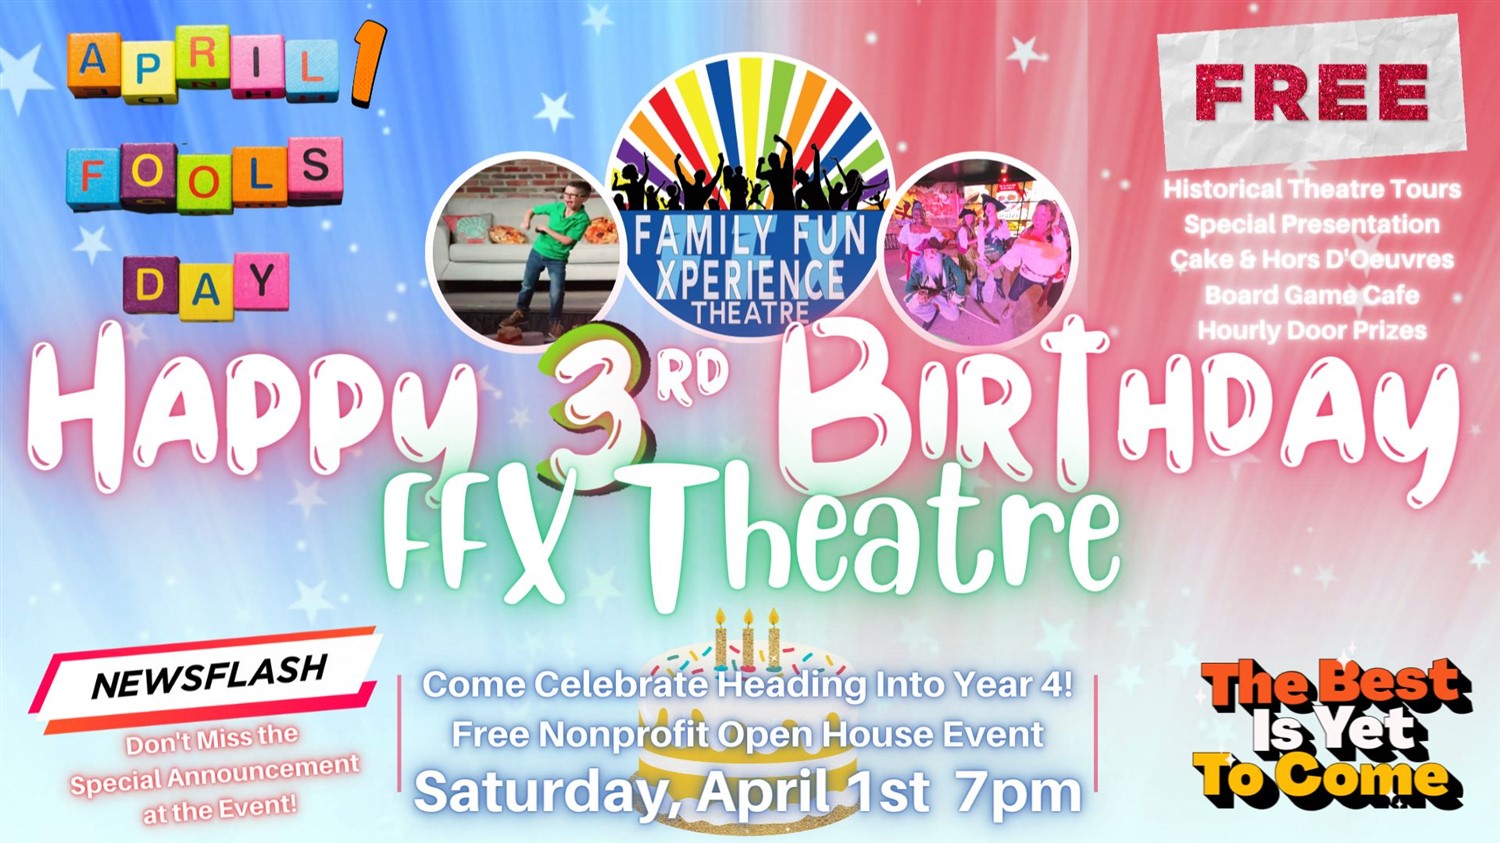 FFX 3rd BIRTHDAY BASH Free Nonprofit Open House Event on Apr 01, 19:00@FFX Theatre - Buy tickets and Get information on Family Fun Xperience tickets.ffxshow.org